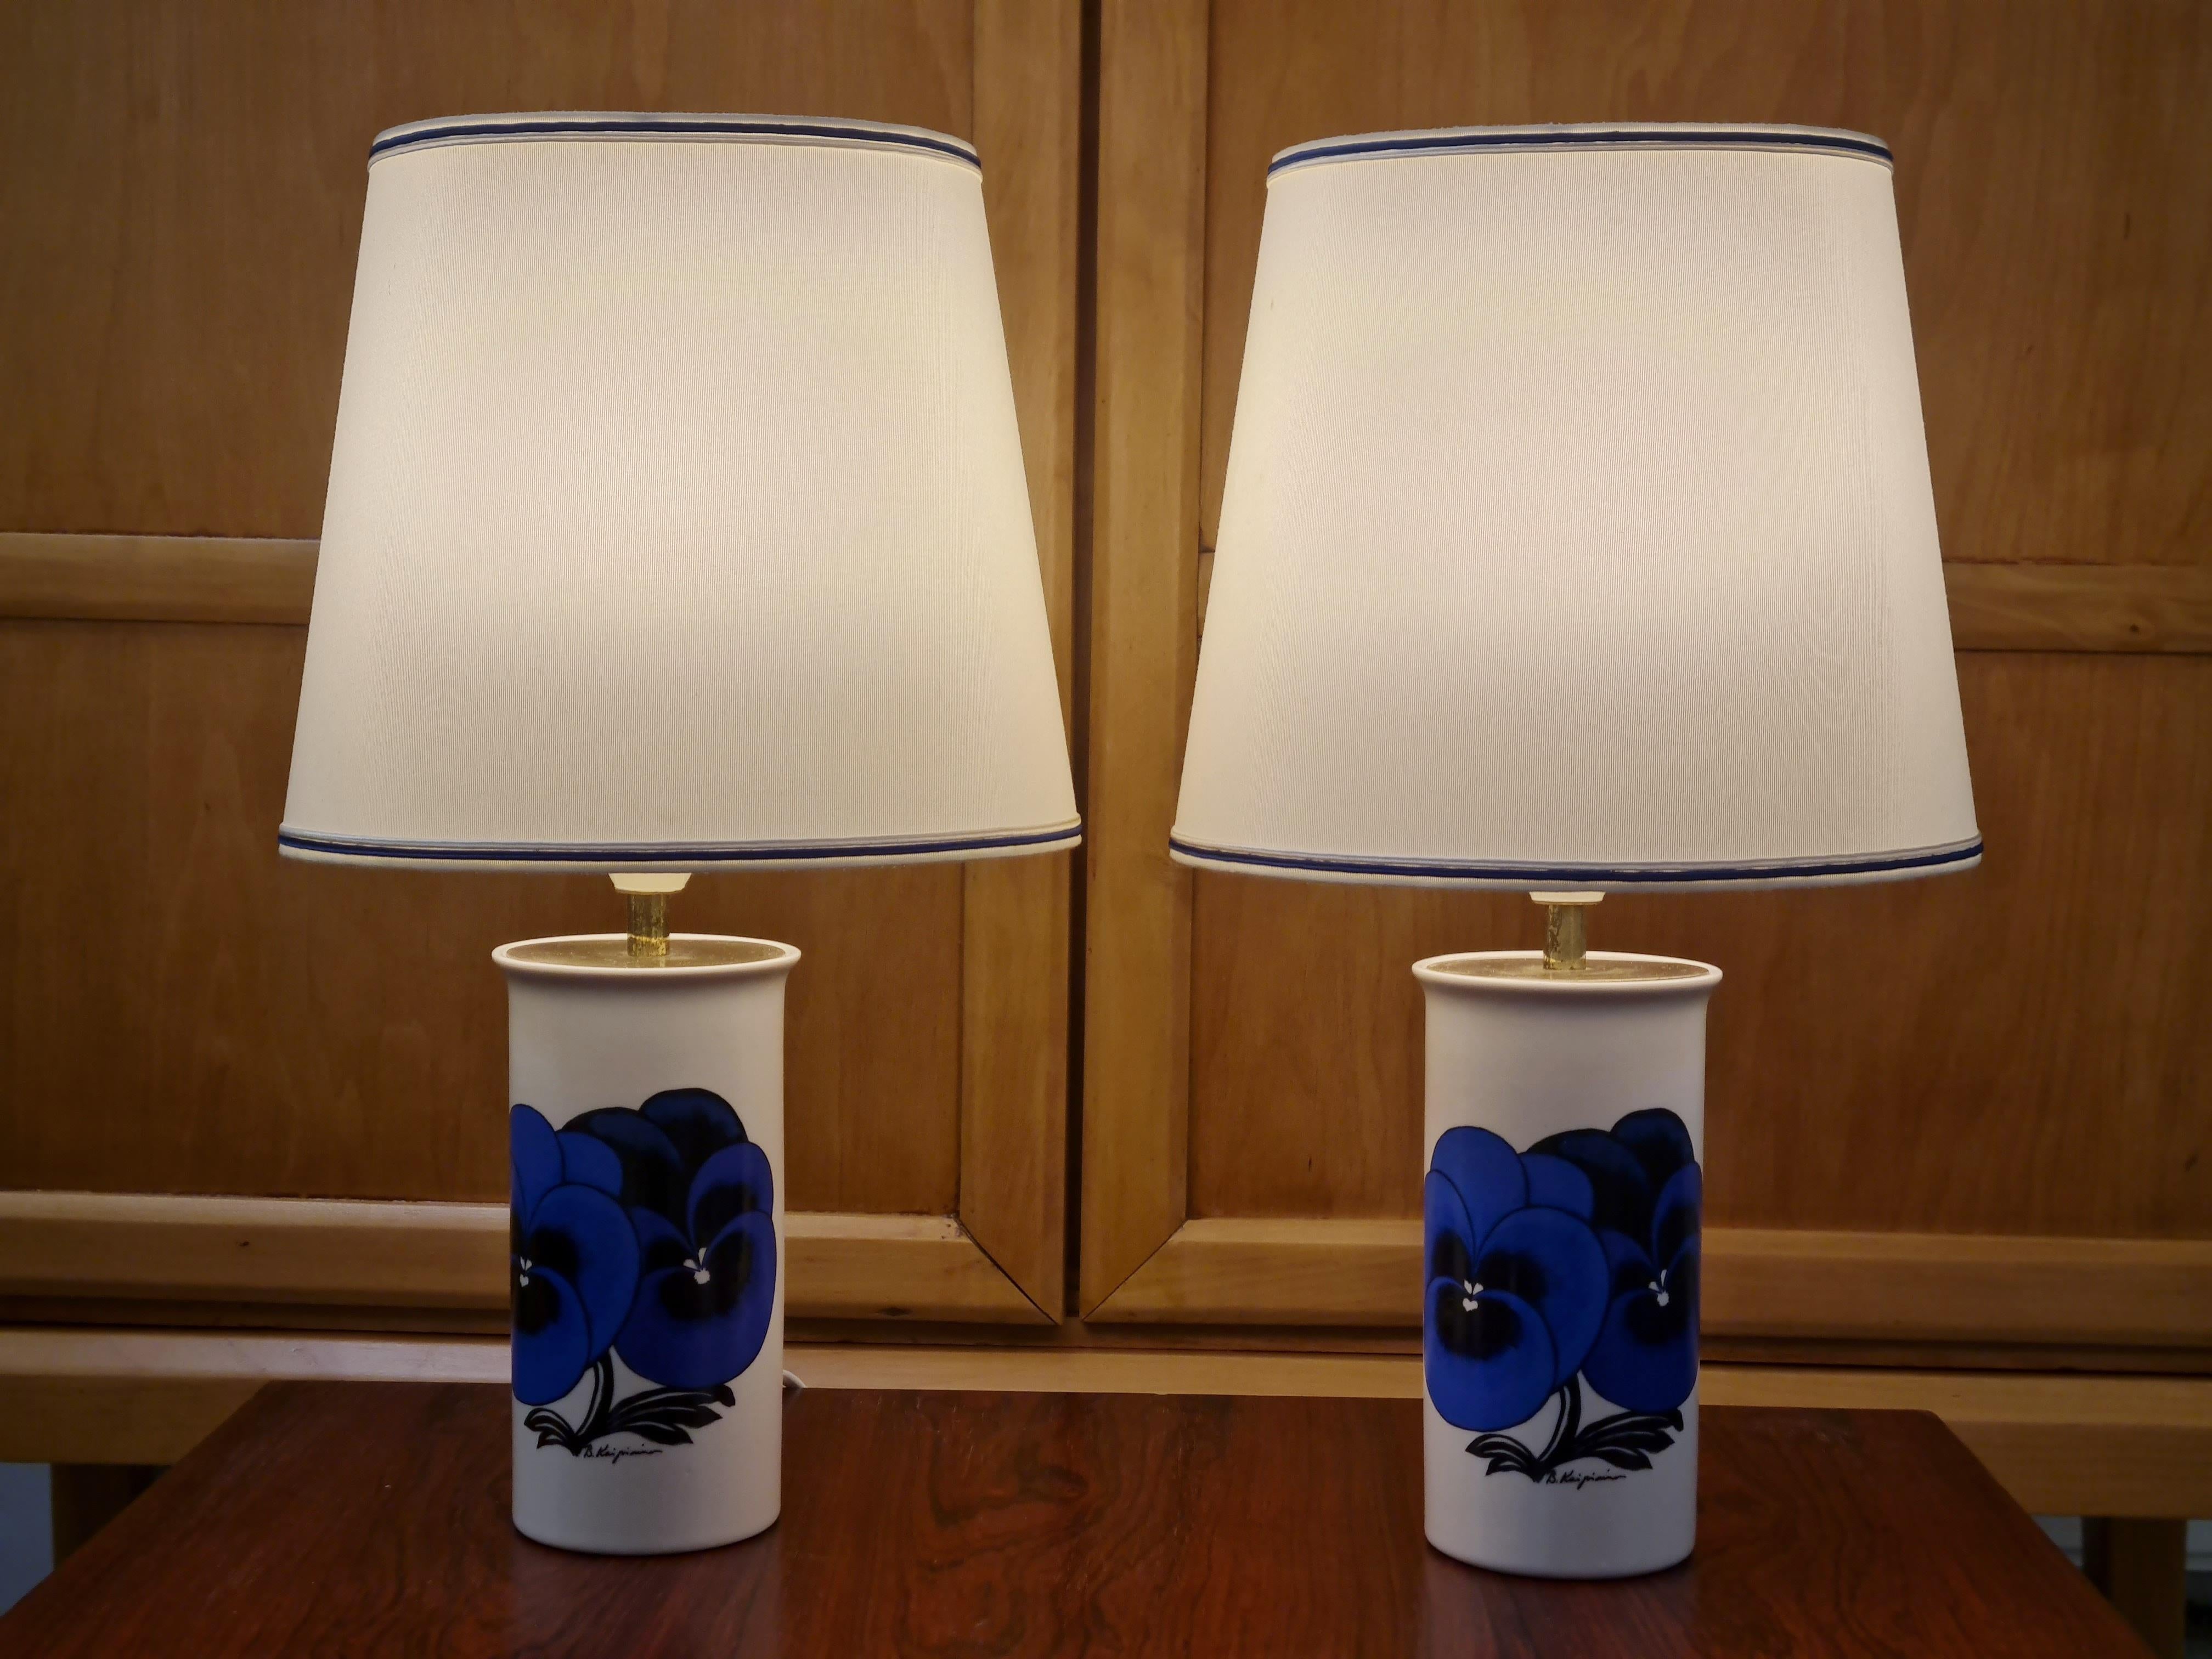 A Pair of Birger Kaipiainen Table Lamps, Arabia 1980s In Good Condition For Sale In Helsinki, FI